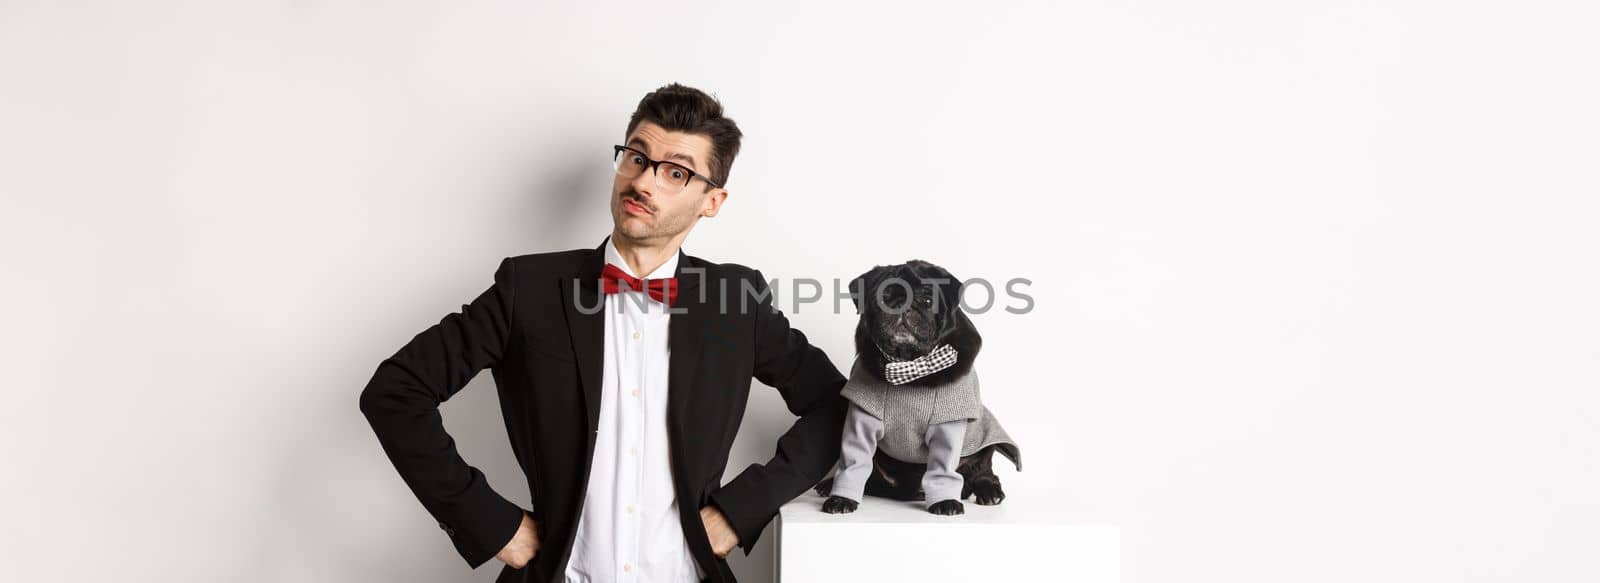 Animals, party and celebration concept. Handsome young man and puppy in formal suits looking at camera, standing over white background.